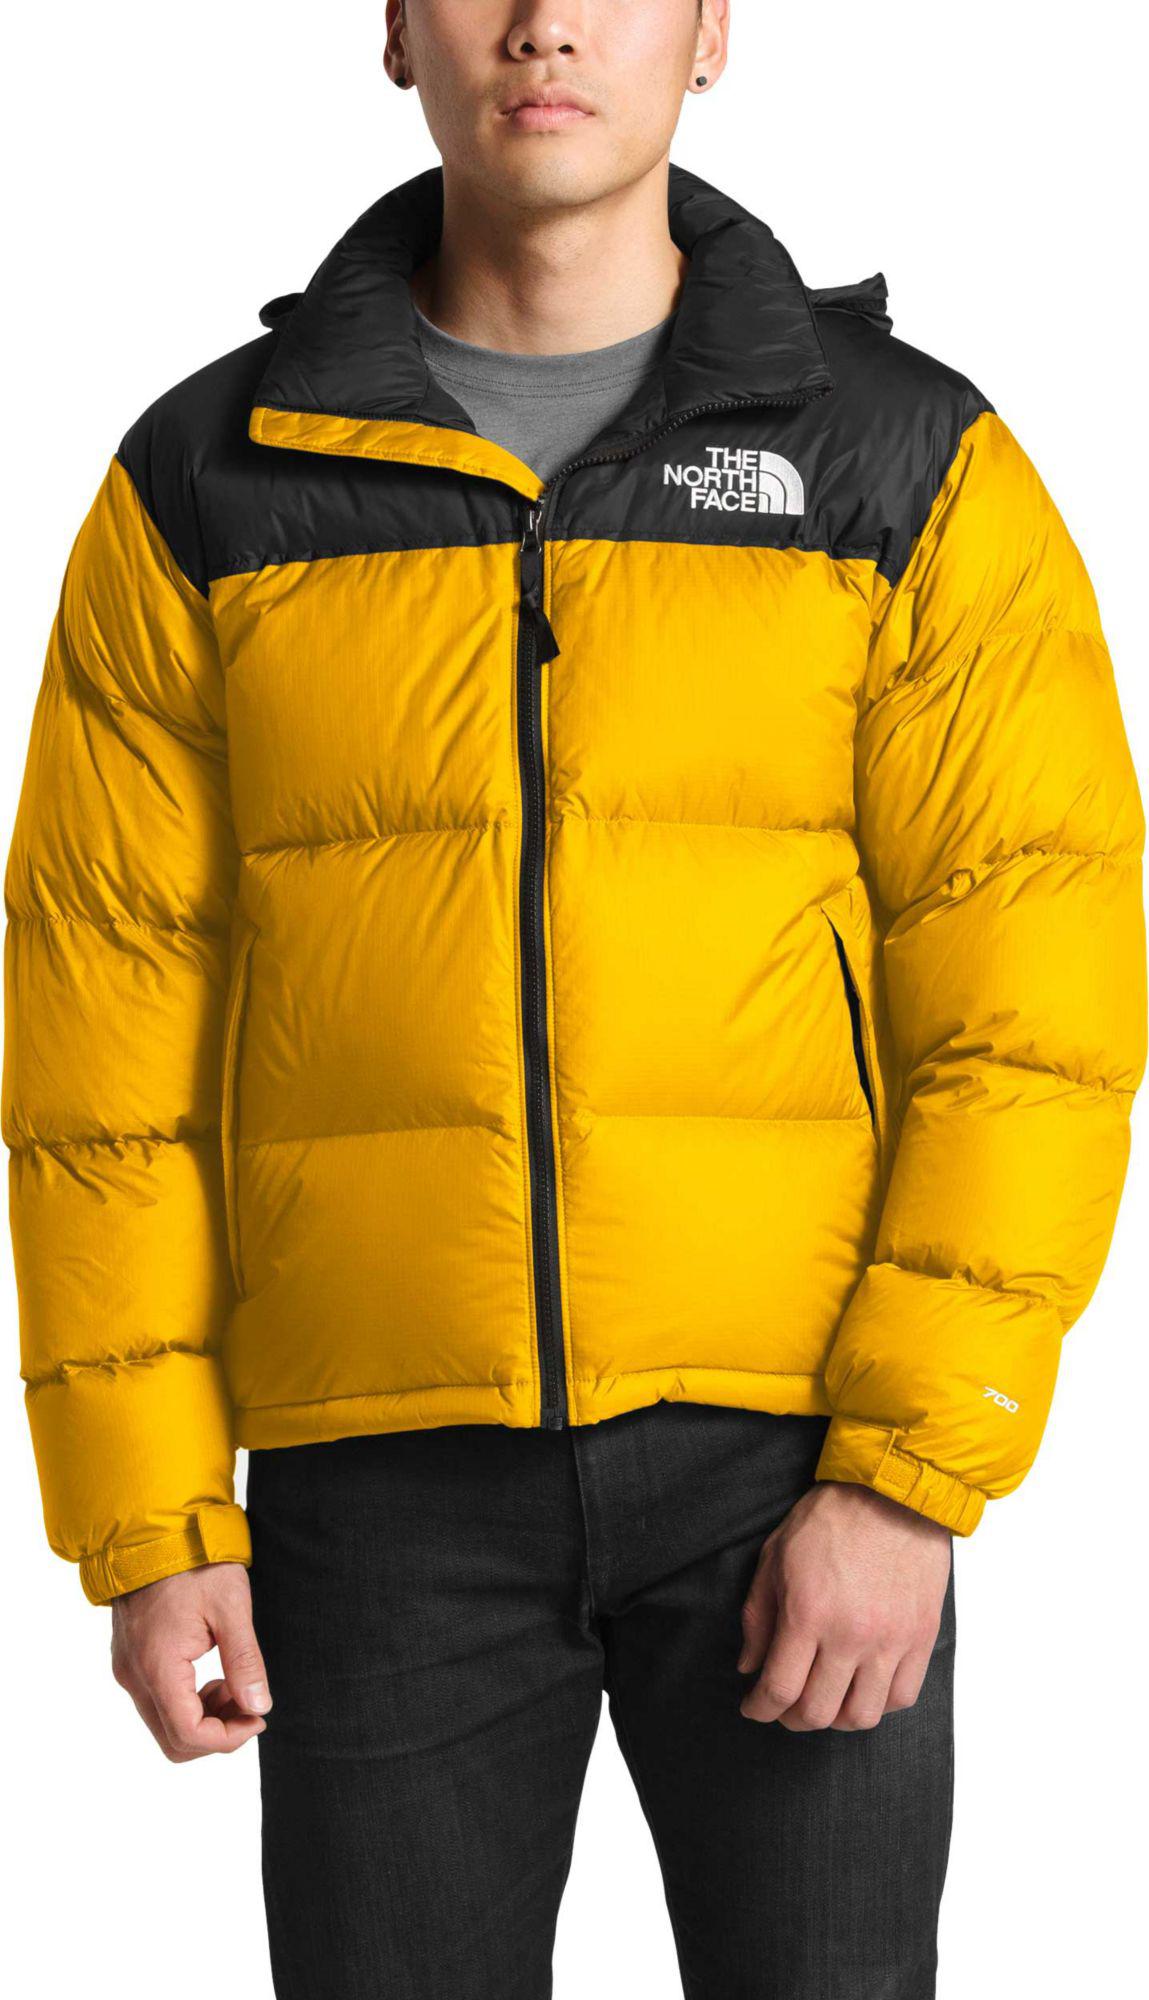 The North Face 1996 Retro Nuptse Jacket in Yellow for Men - Lyst